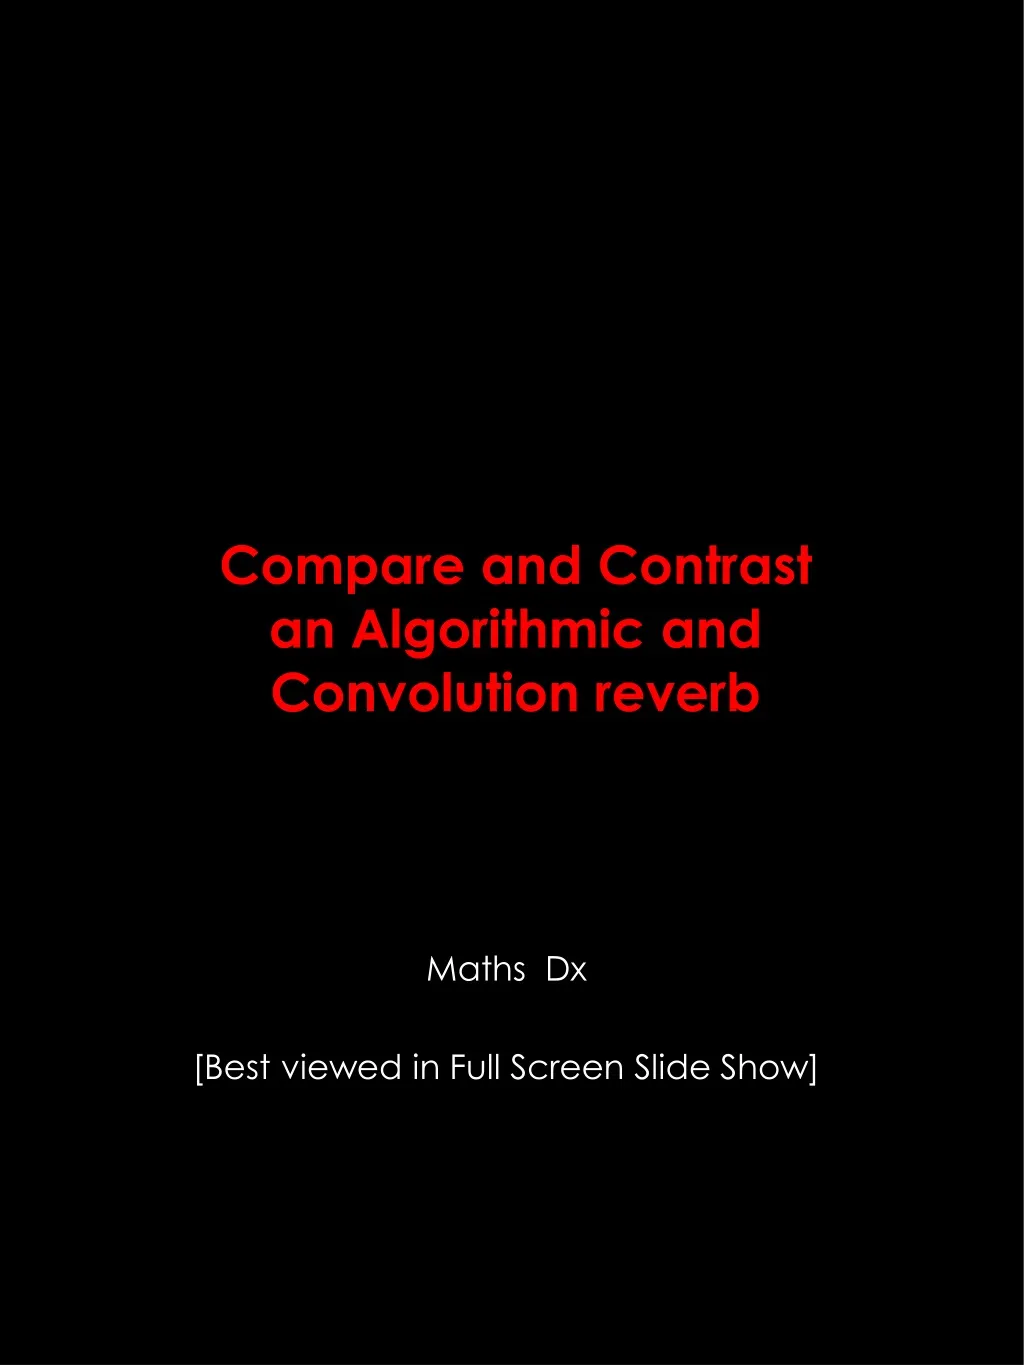 compare and contrast an algorithmic and convolution reverb